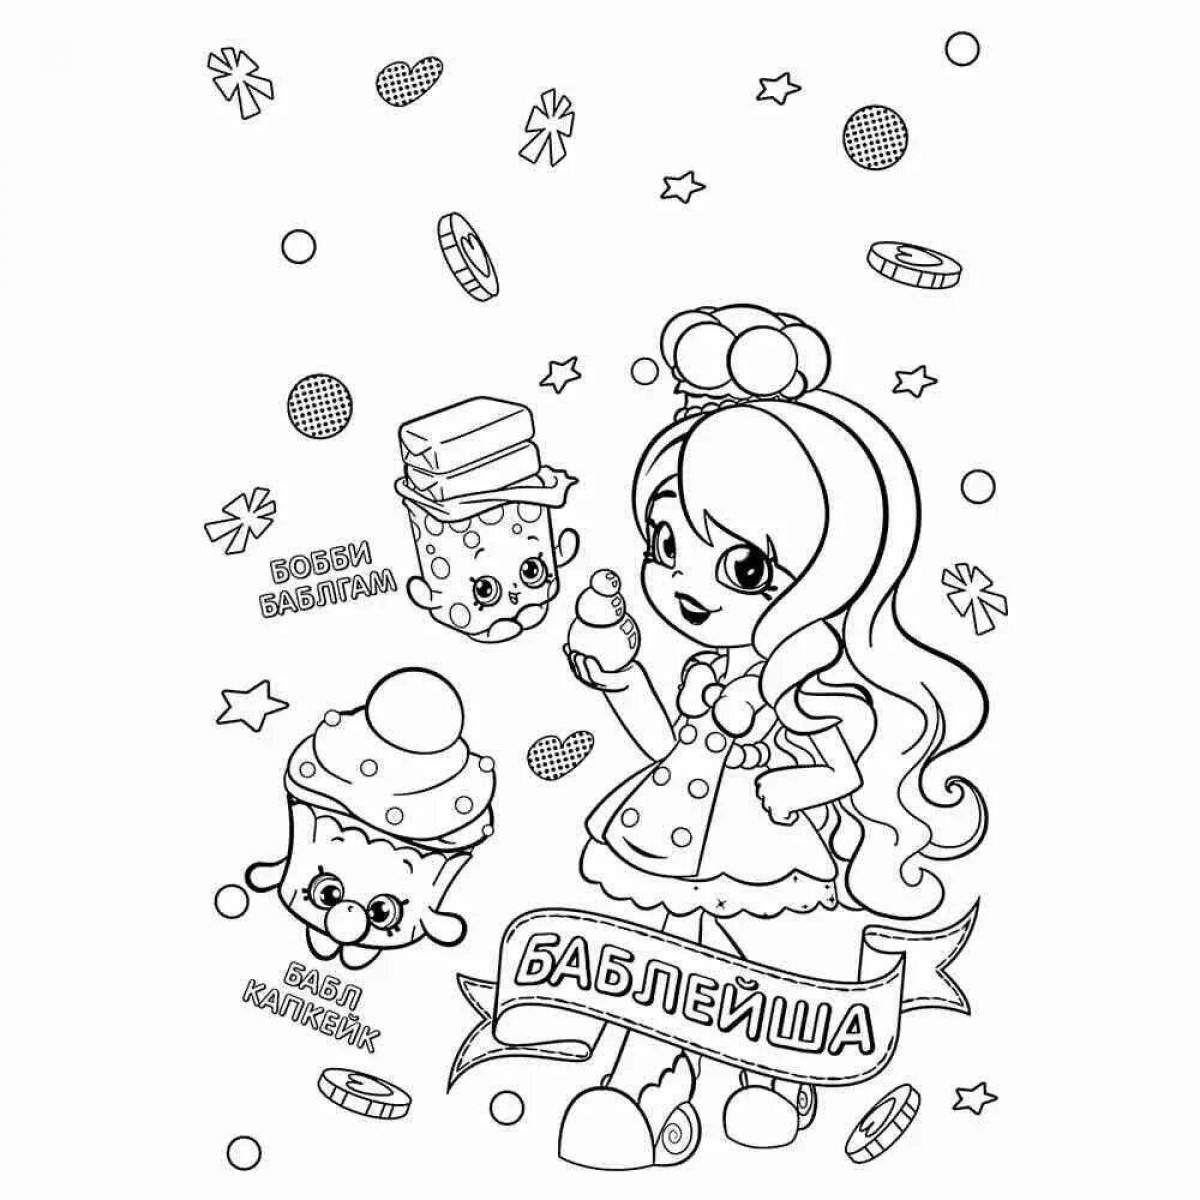 Sweet apple shopkins coloring page